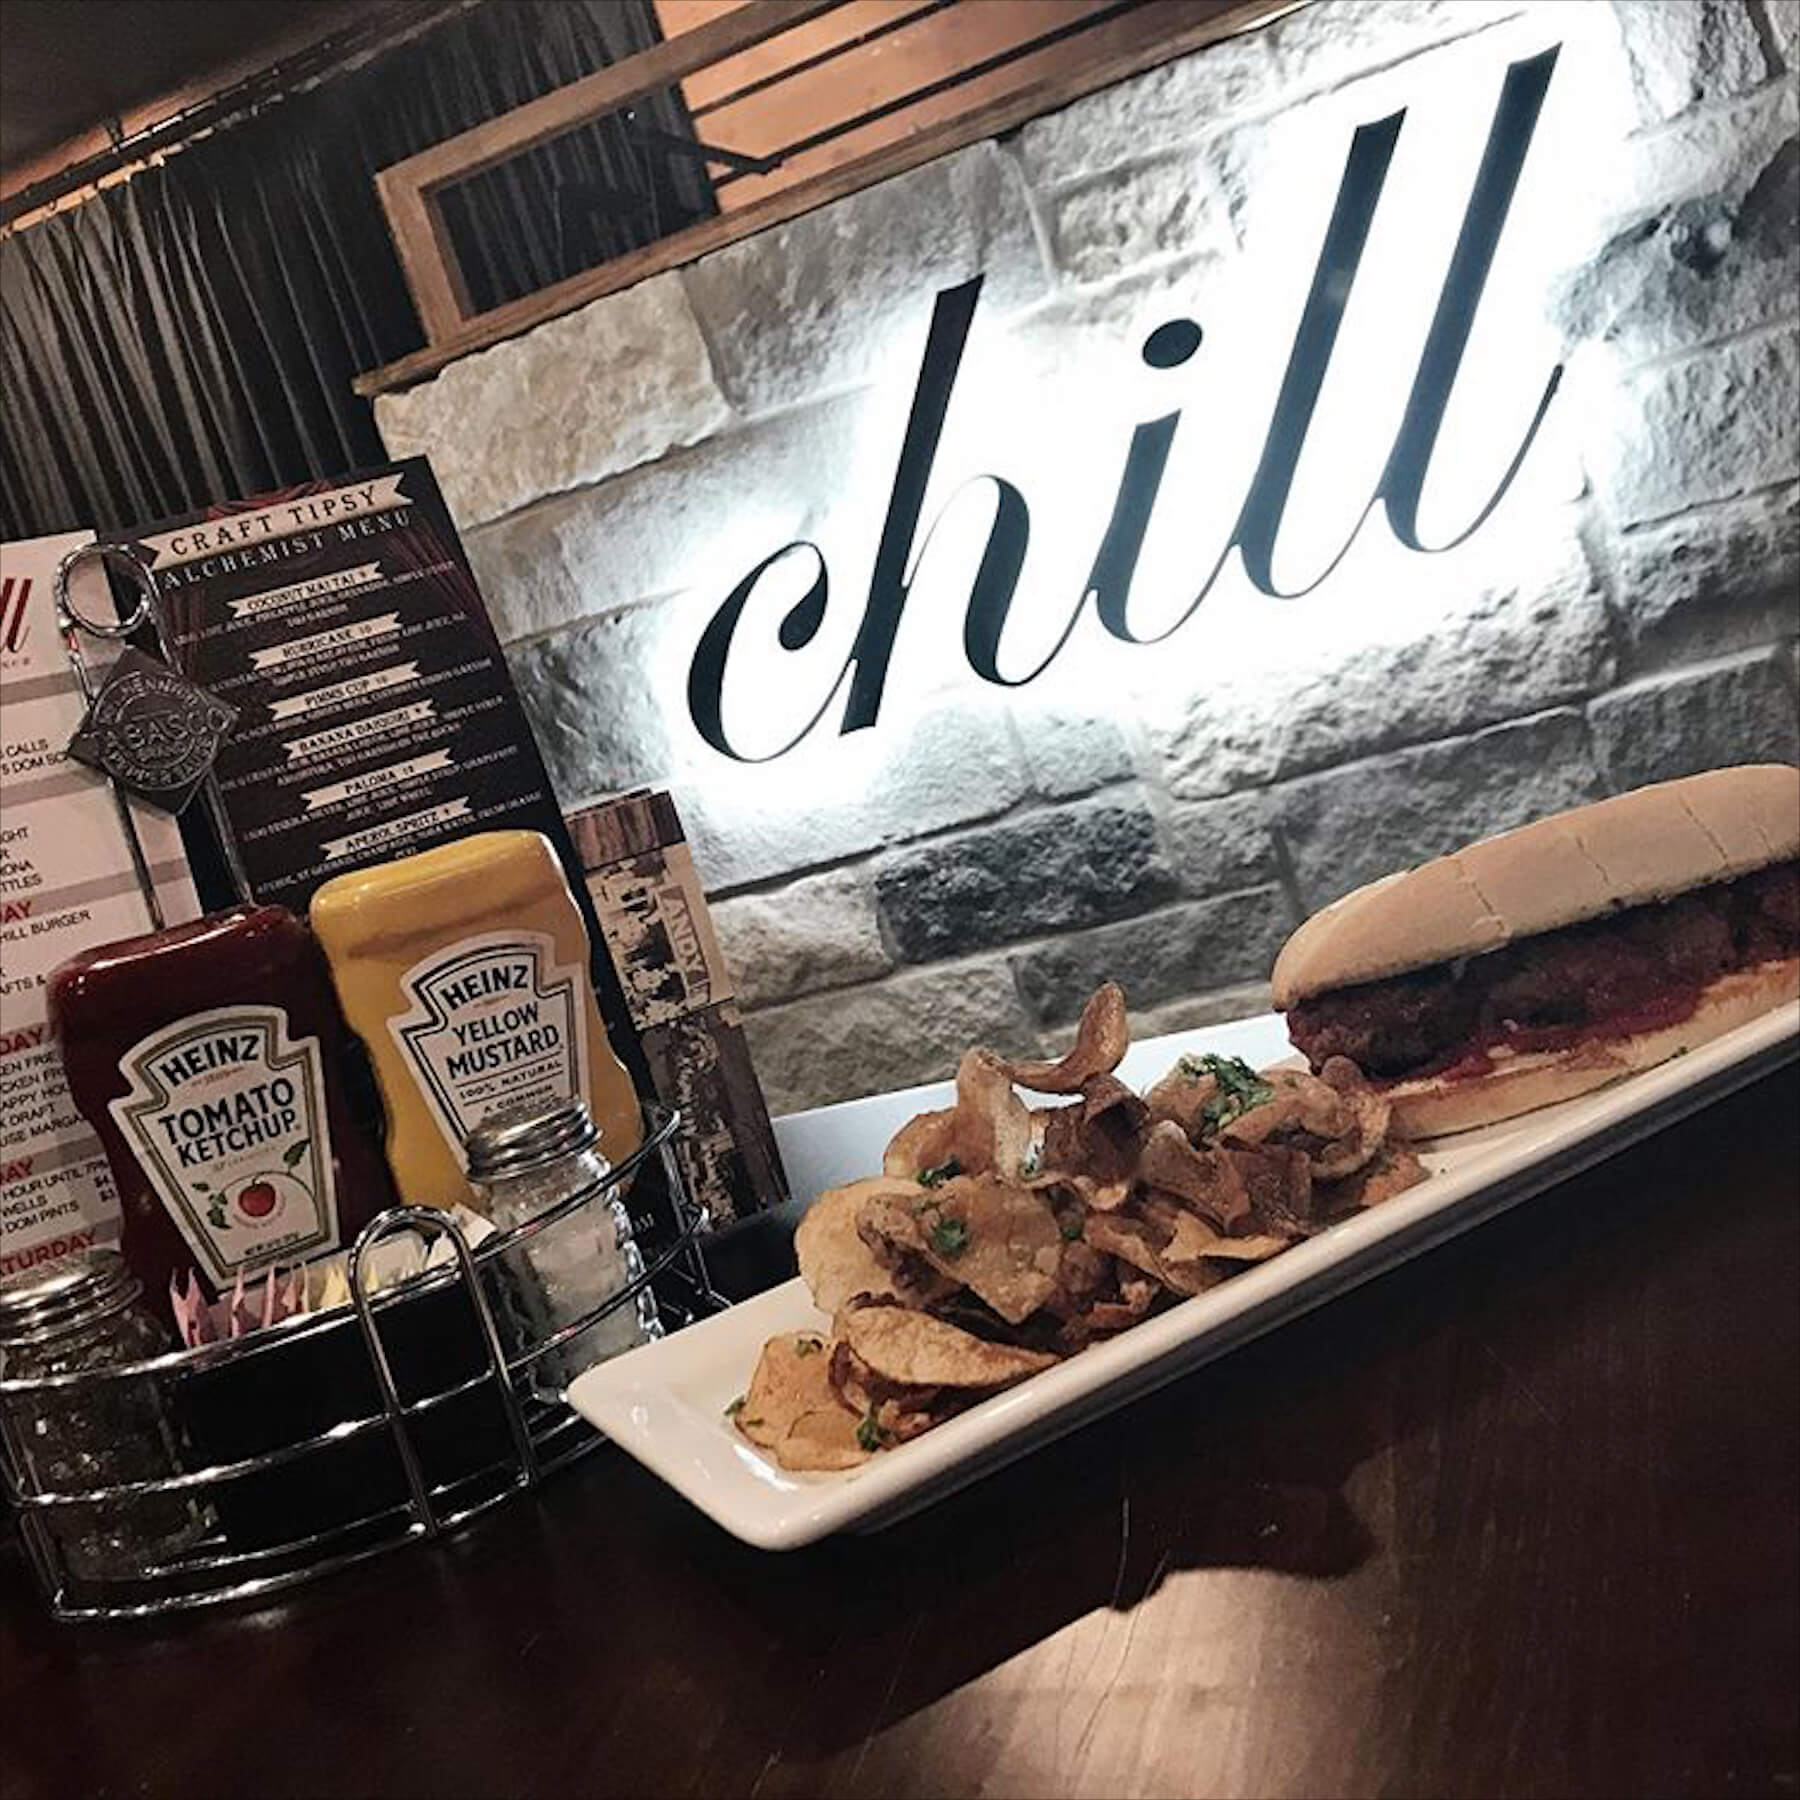 A sandwich and chips on a plate with a sign that says " chill ".